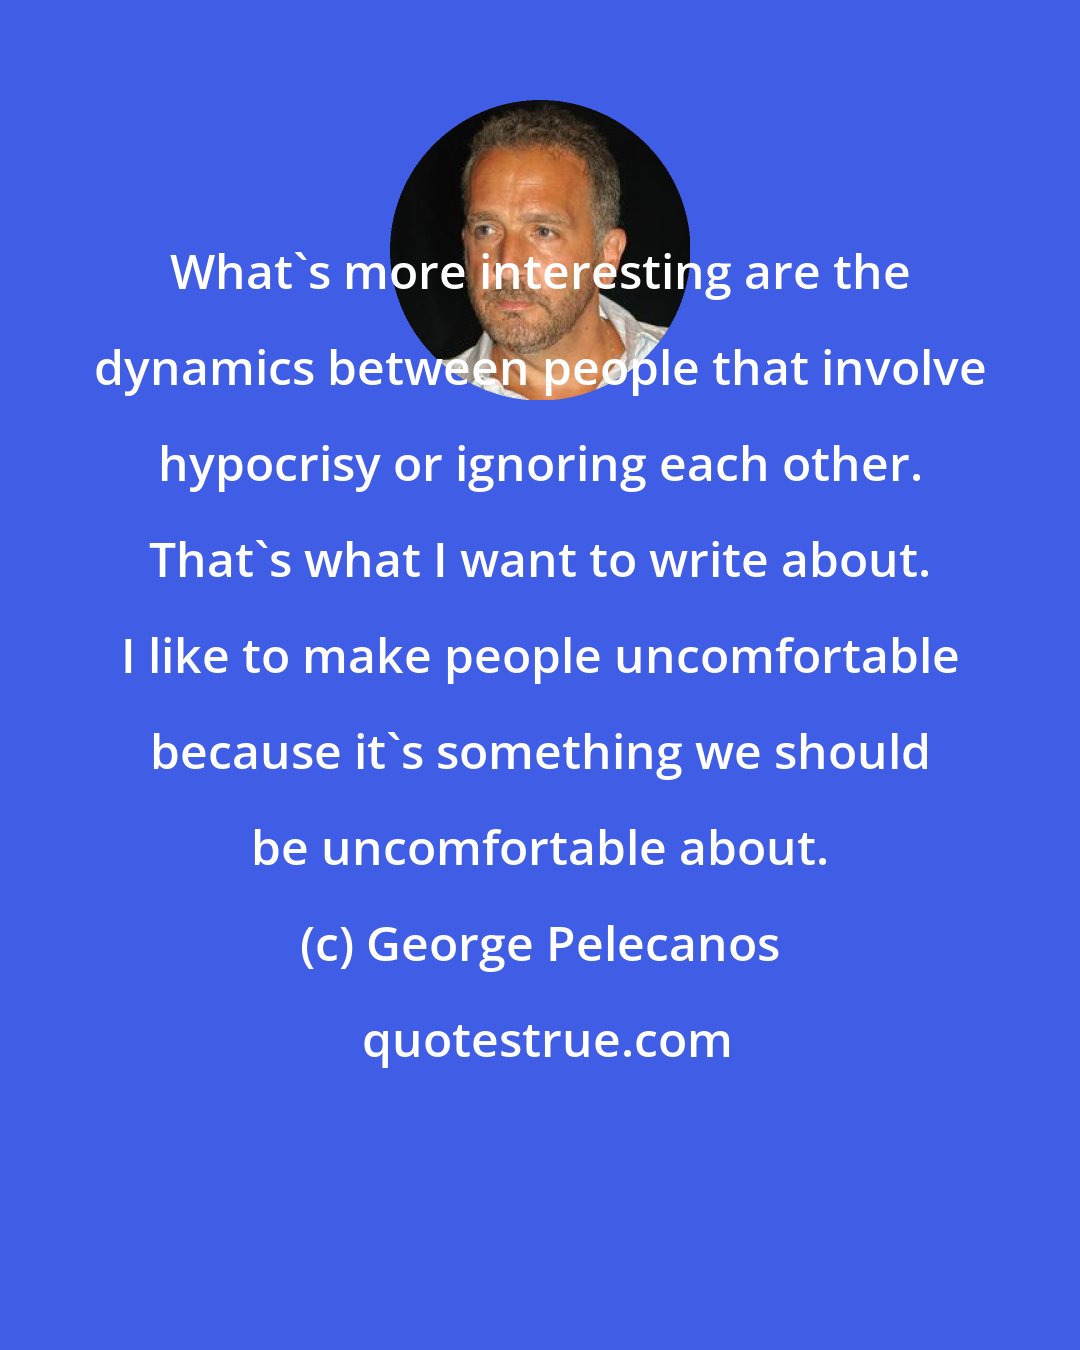 George Pelecanos: What's more interesting are the dynamics between people that involve hypocrisy or ignoring each other. That's what I want to write about. I like to make people uncomfortable because it's something we should be uncomfortable about.